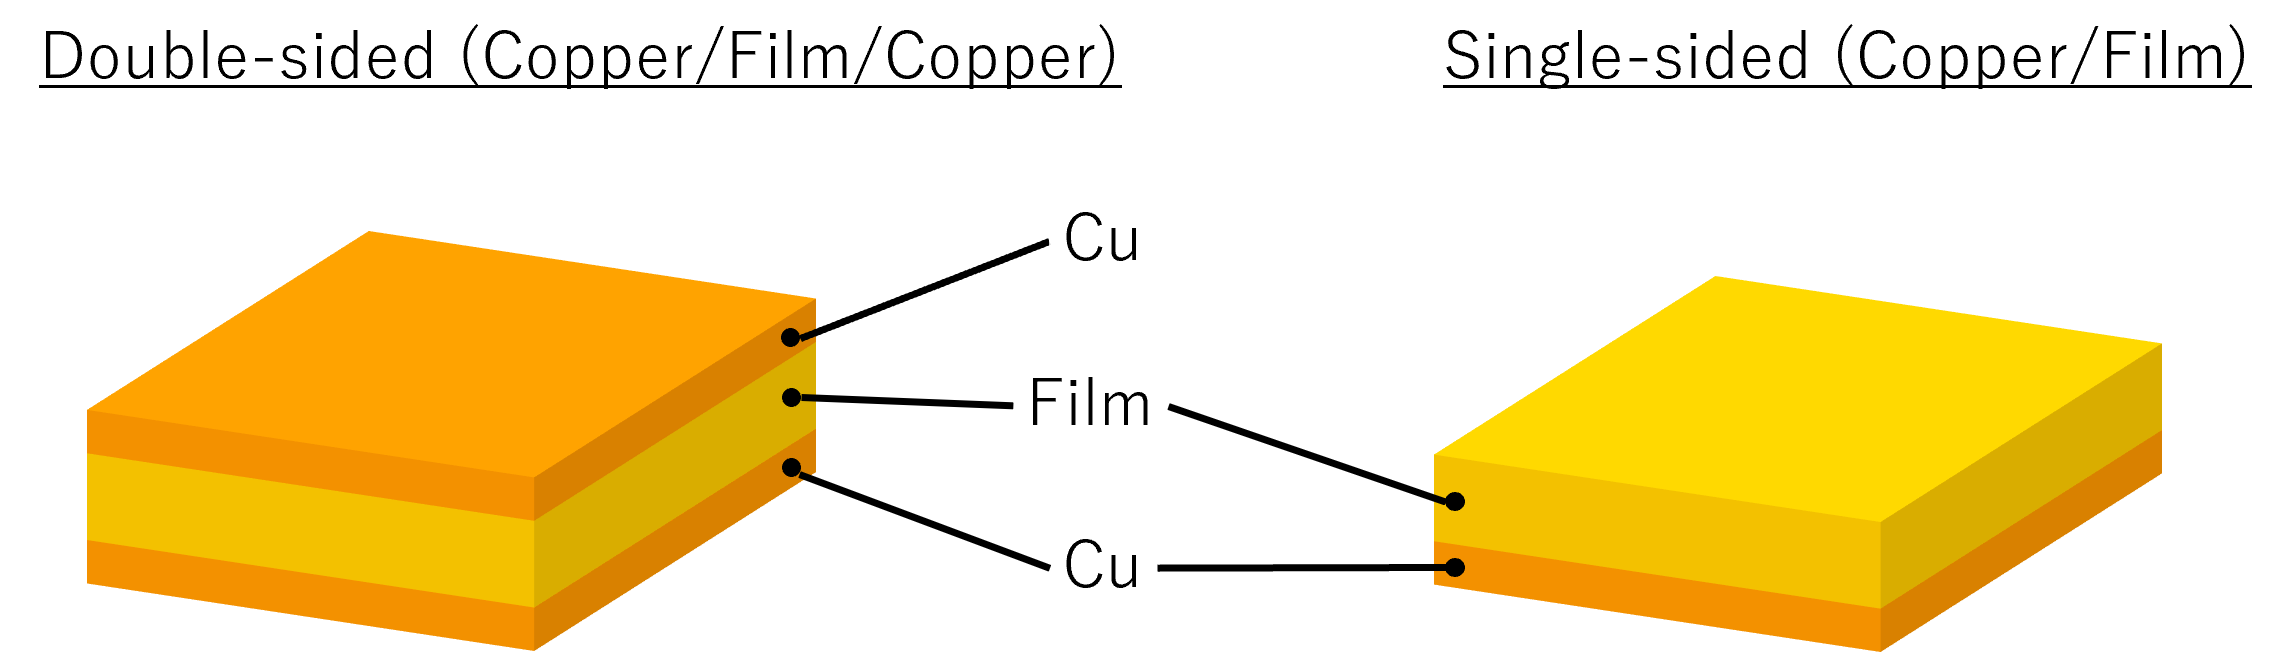 The interface appears to be smooth. Diagram showing the layers of single-sided and double-sided FCCL.